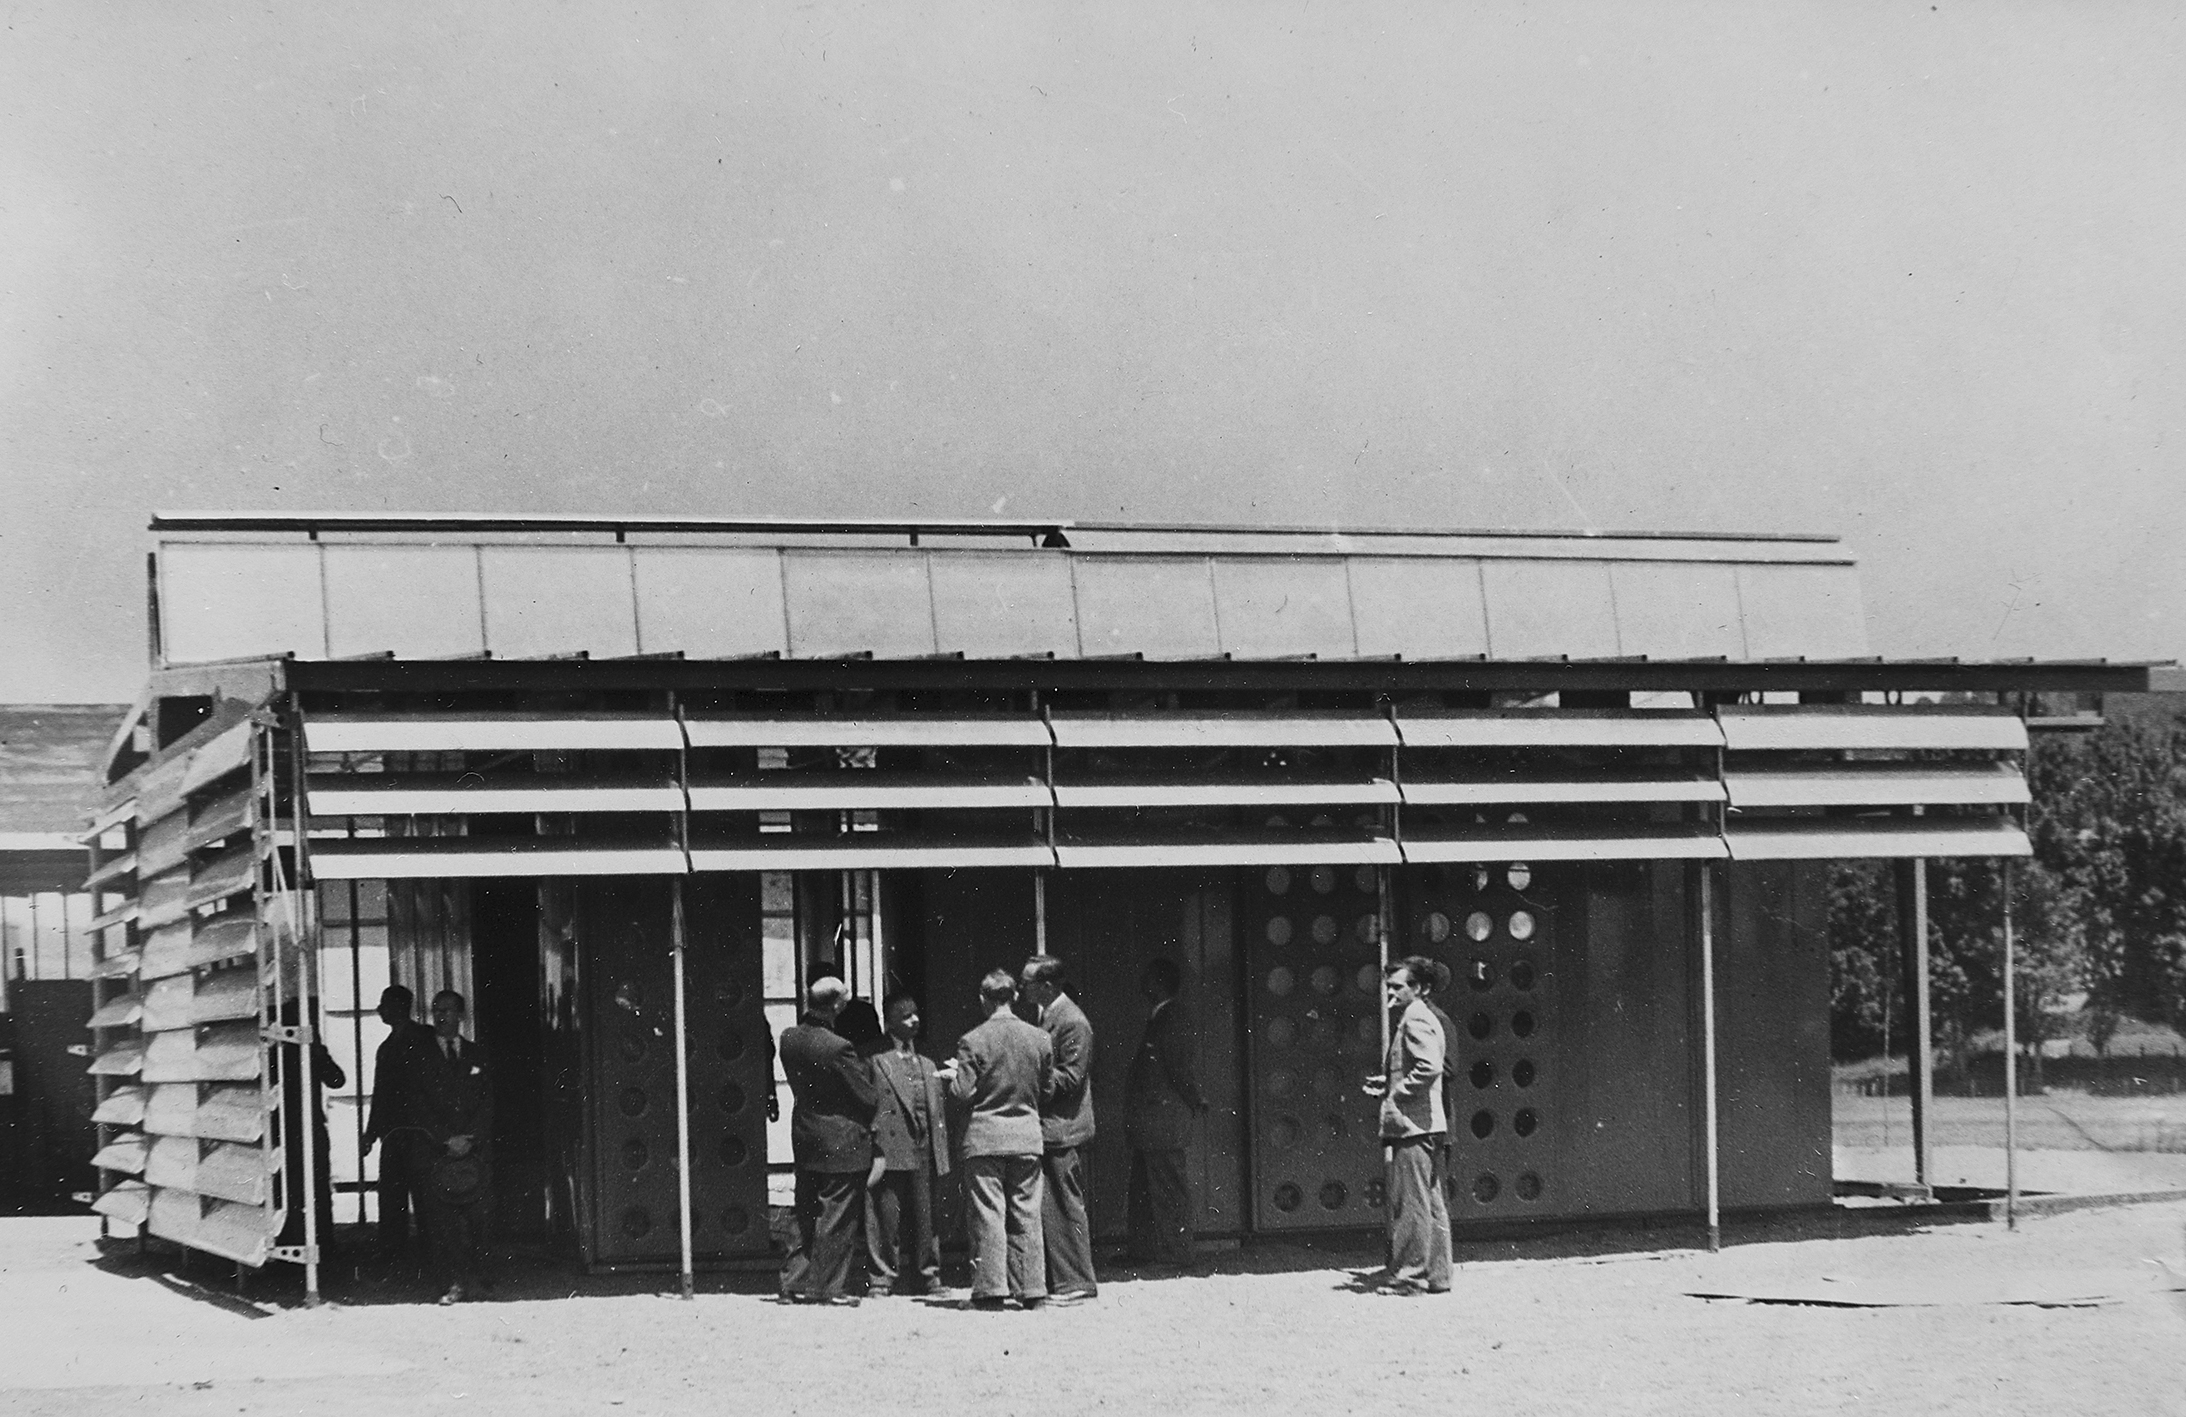 Prototype of the Tropique house for Niamey at the Ateliers Jean Prouvé in Maxéville, 1949 (Henri Prouvé, arch.).